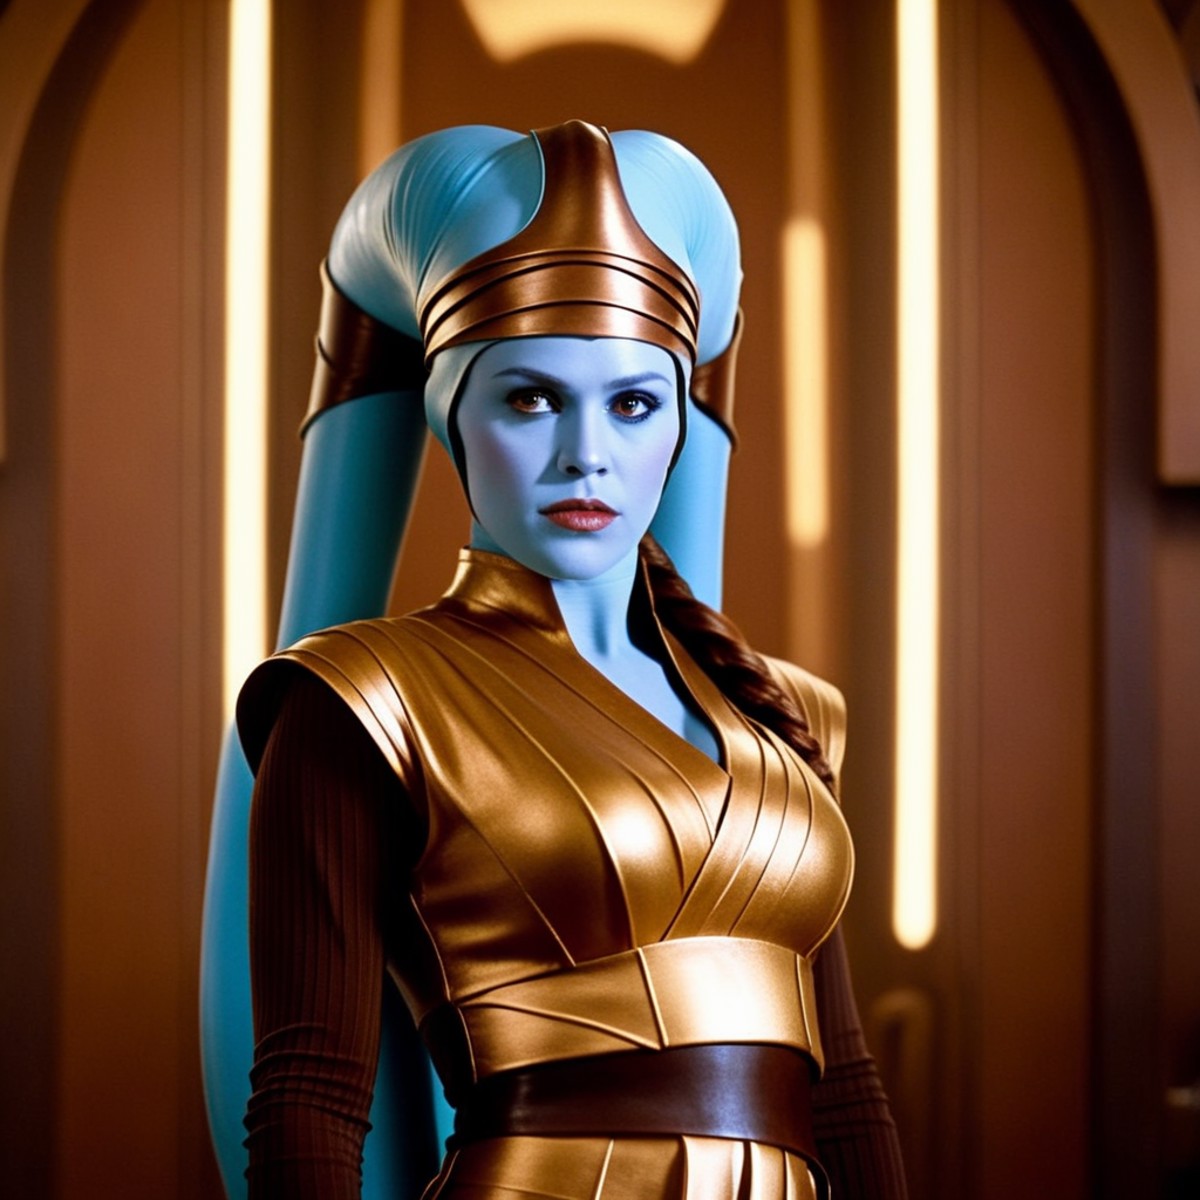 cinematic film still of <lora:Aayla Secura:1.5>
Aayla Secura a woman in a gold dress standing in a room In Star Wars Unive...